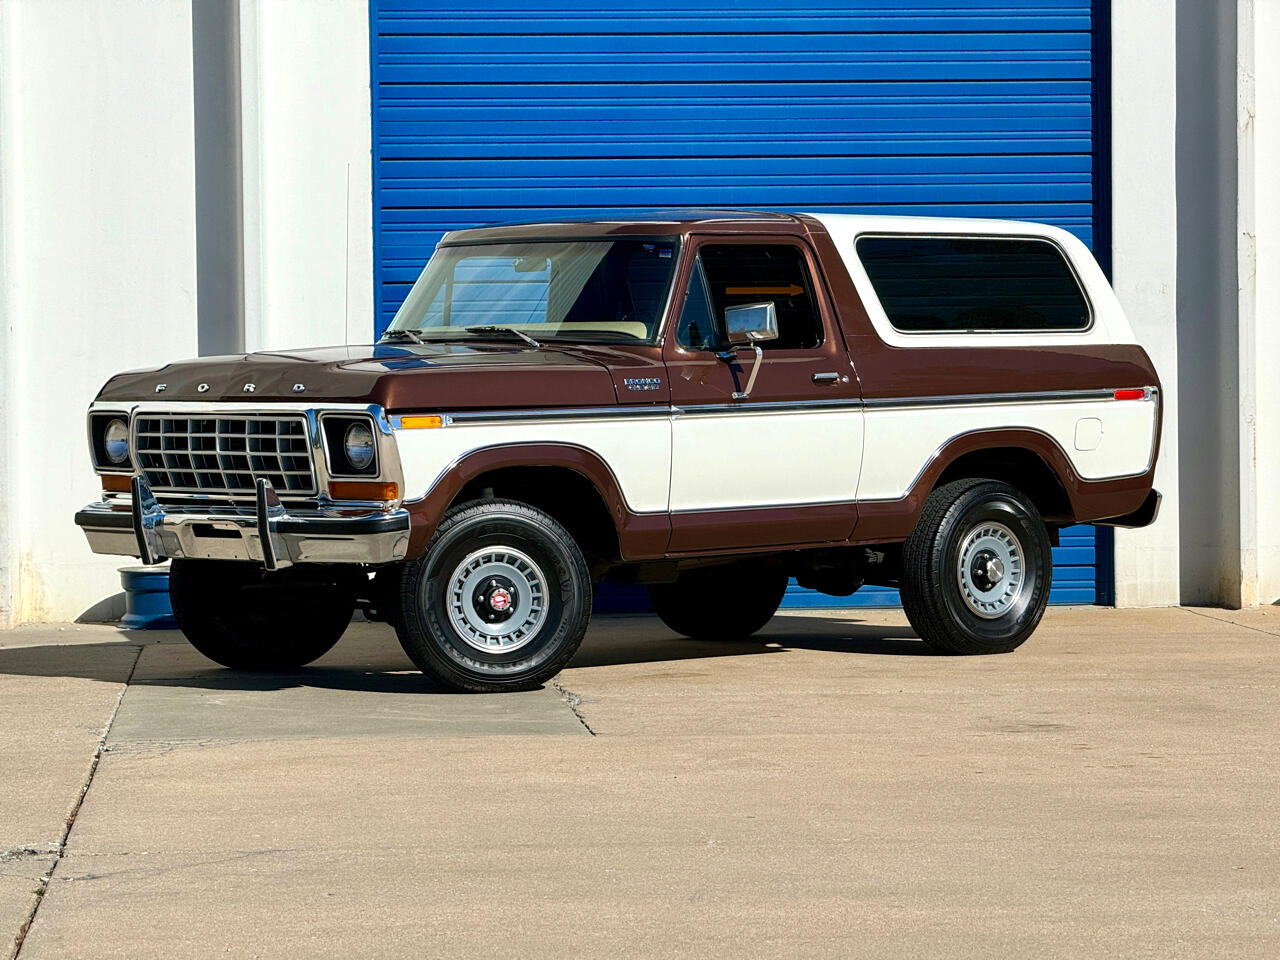 1978 Ford Bronco 8